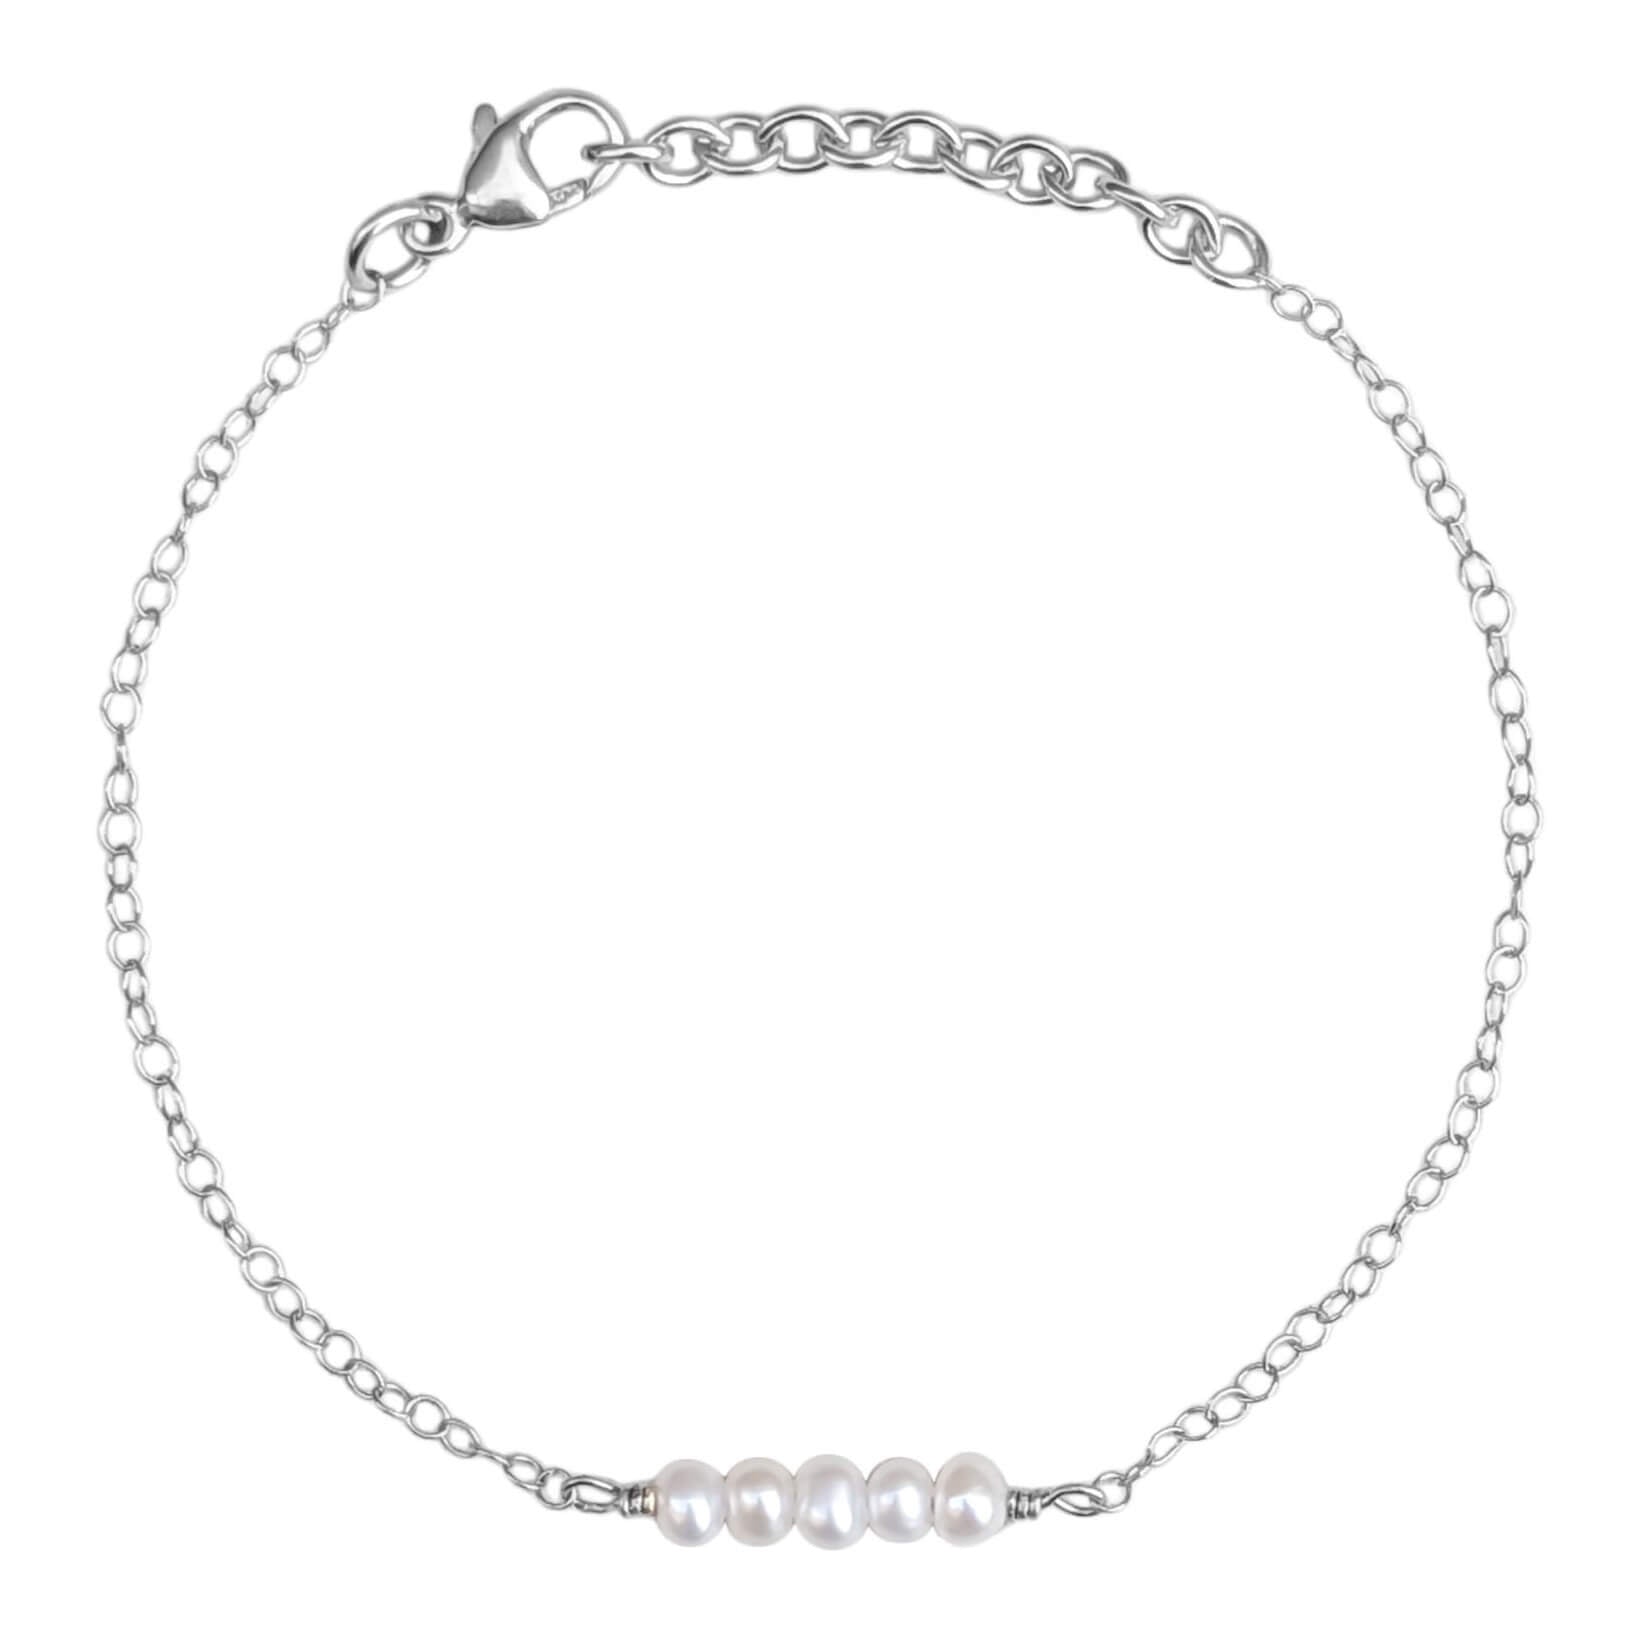 tiny pearl bar bracelet in sterling silver on white background